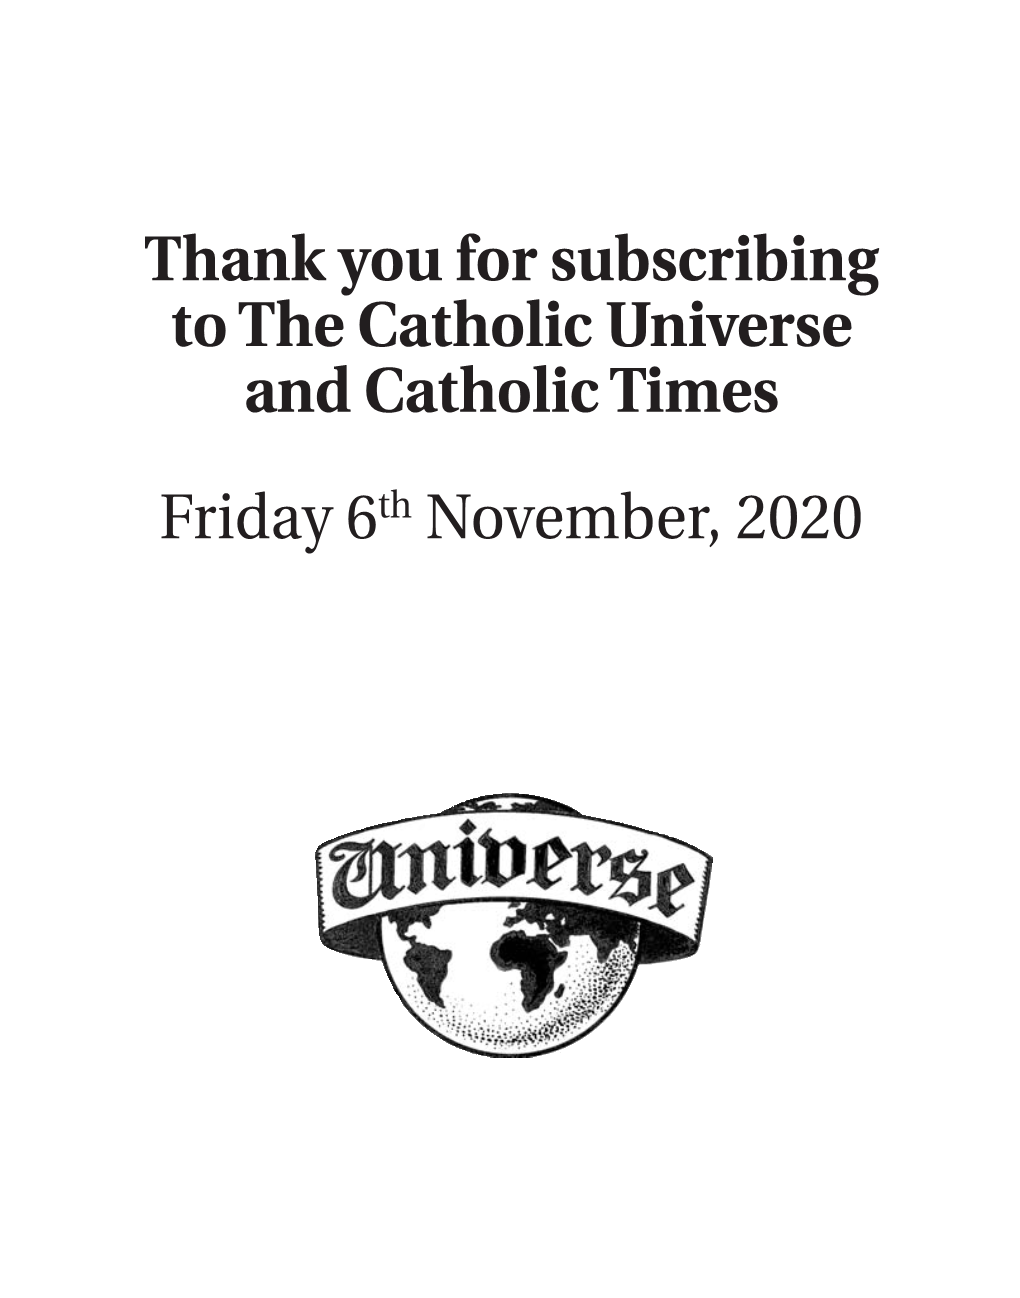 Thank You for Subscribing to the Catholic Universe and Catholic Times